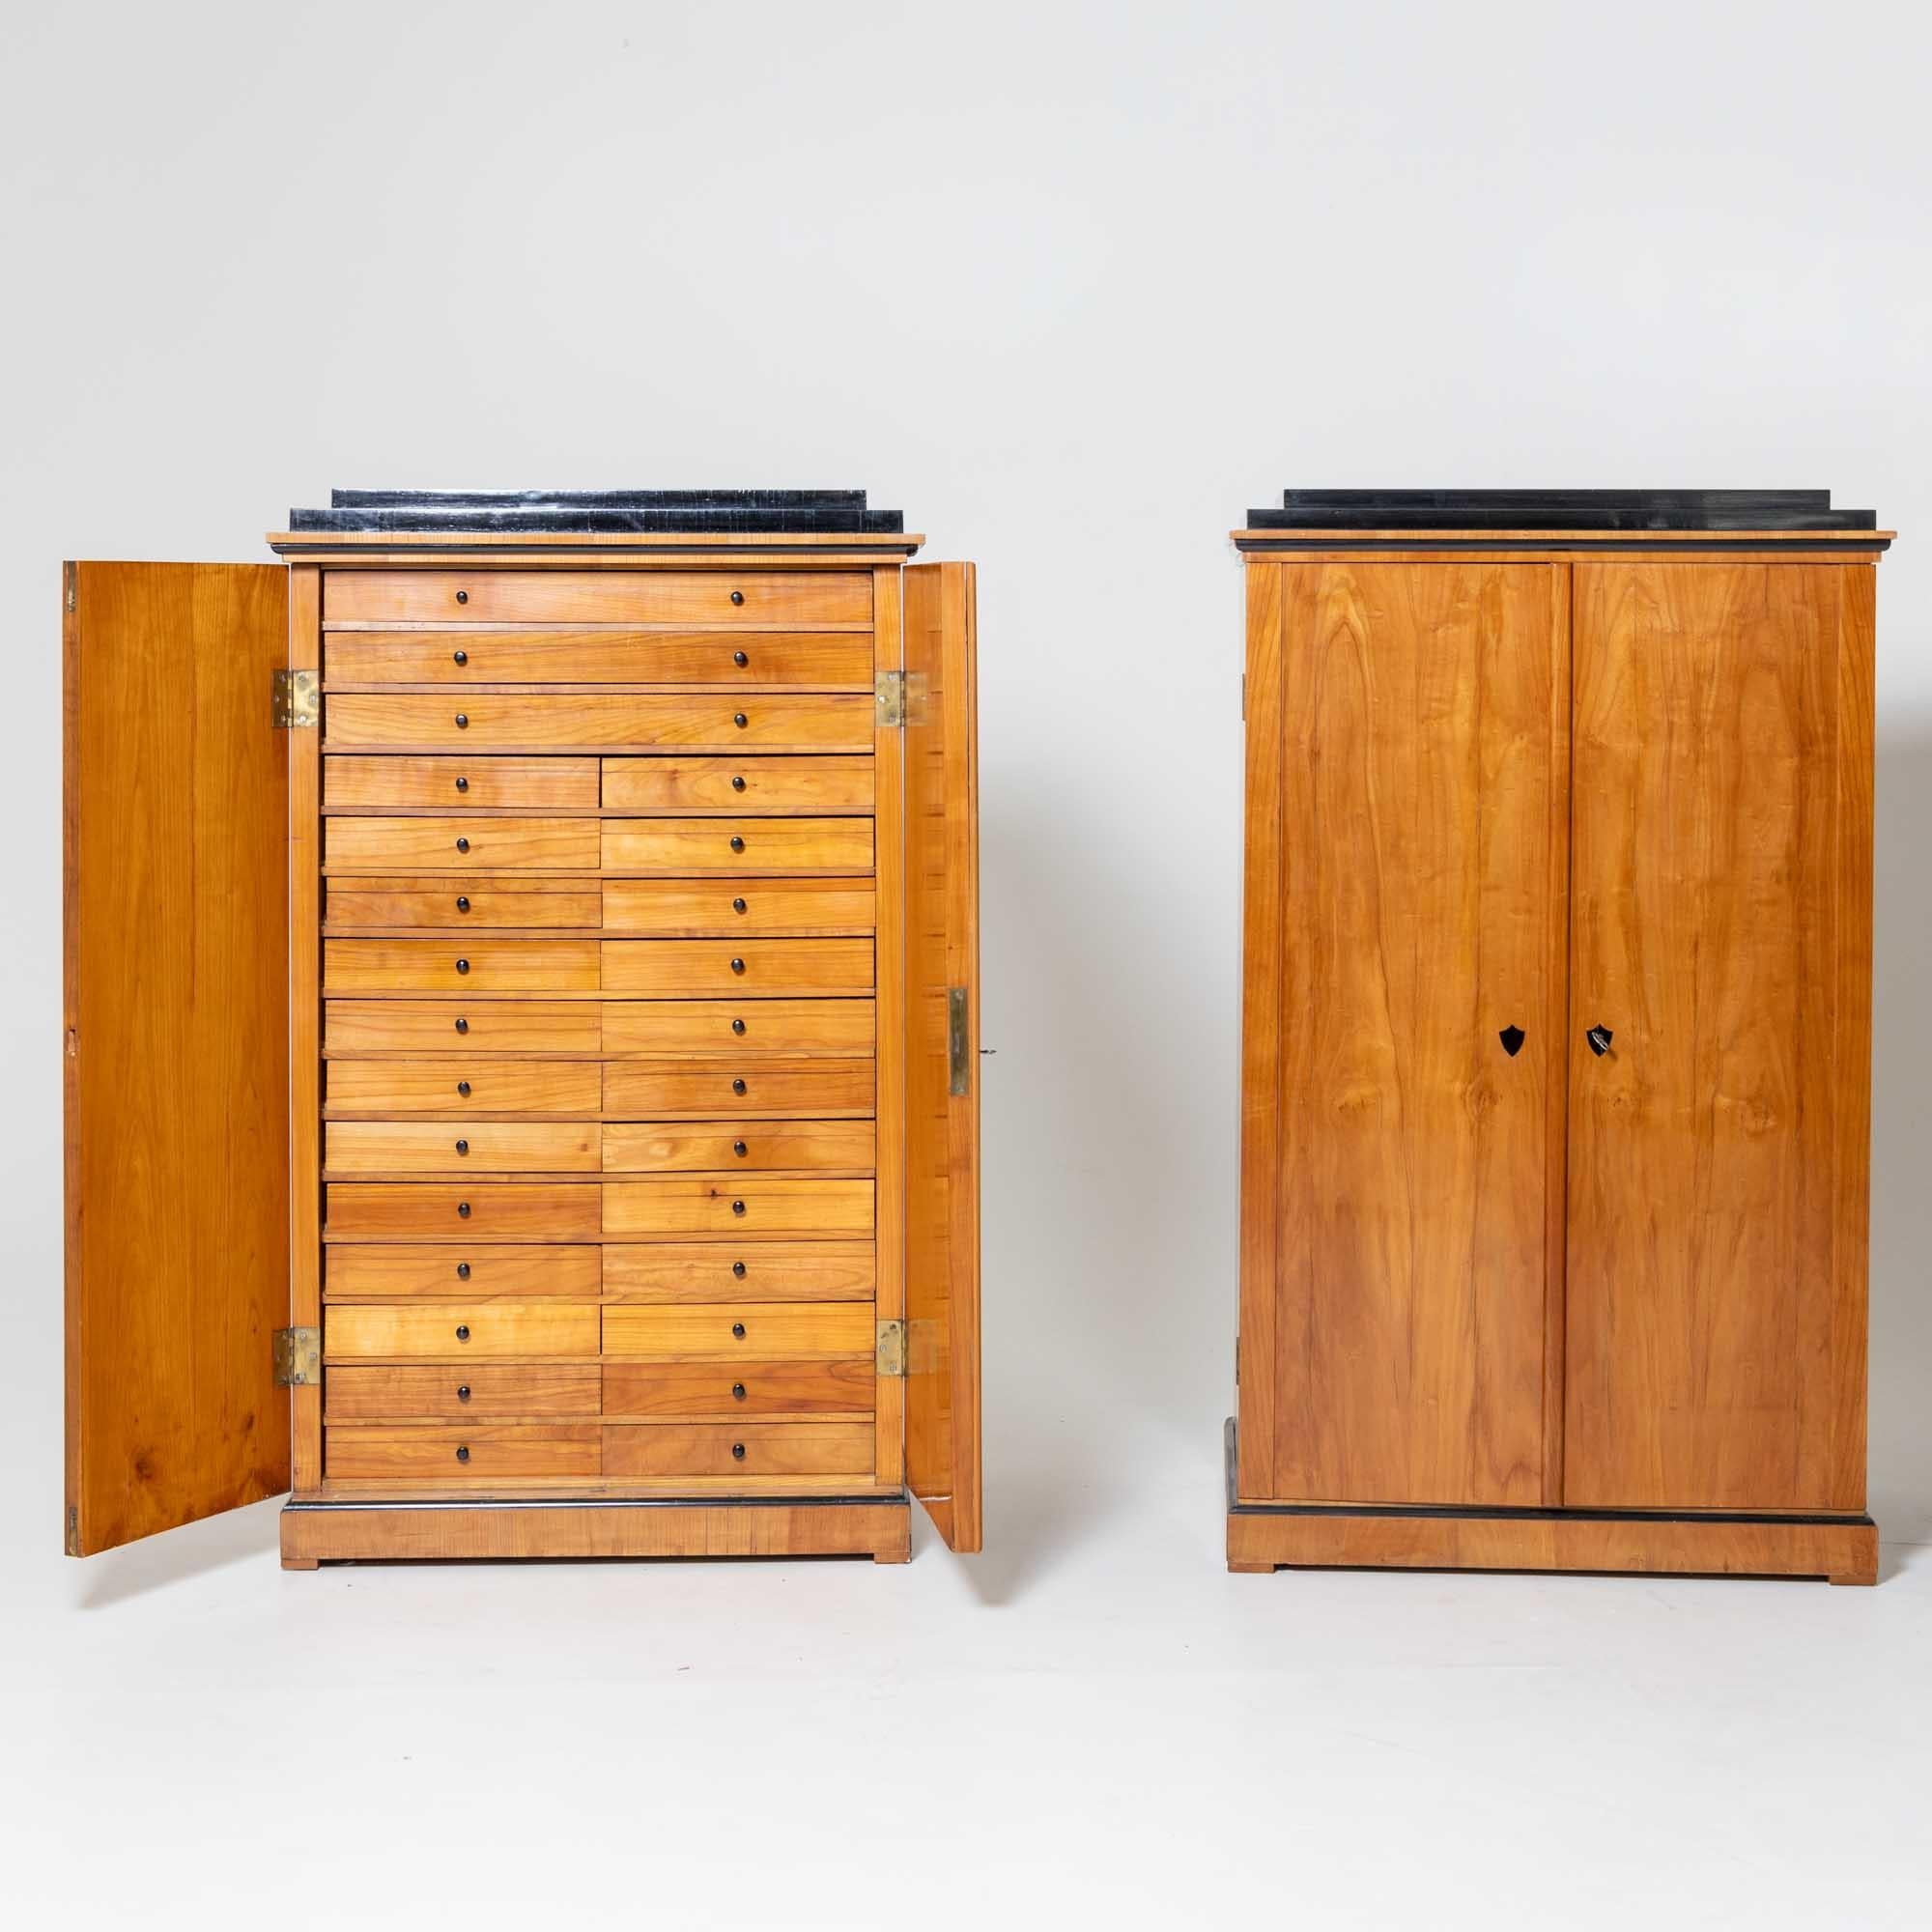 Pair of Biedermeier collection cabinets in cherry veneer with ebonised top plate. The tall two-door cabinets are equipped with a large number of drawers. The drawers are removable and with a glass shelf and glass lid they are ideal for storing even